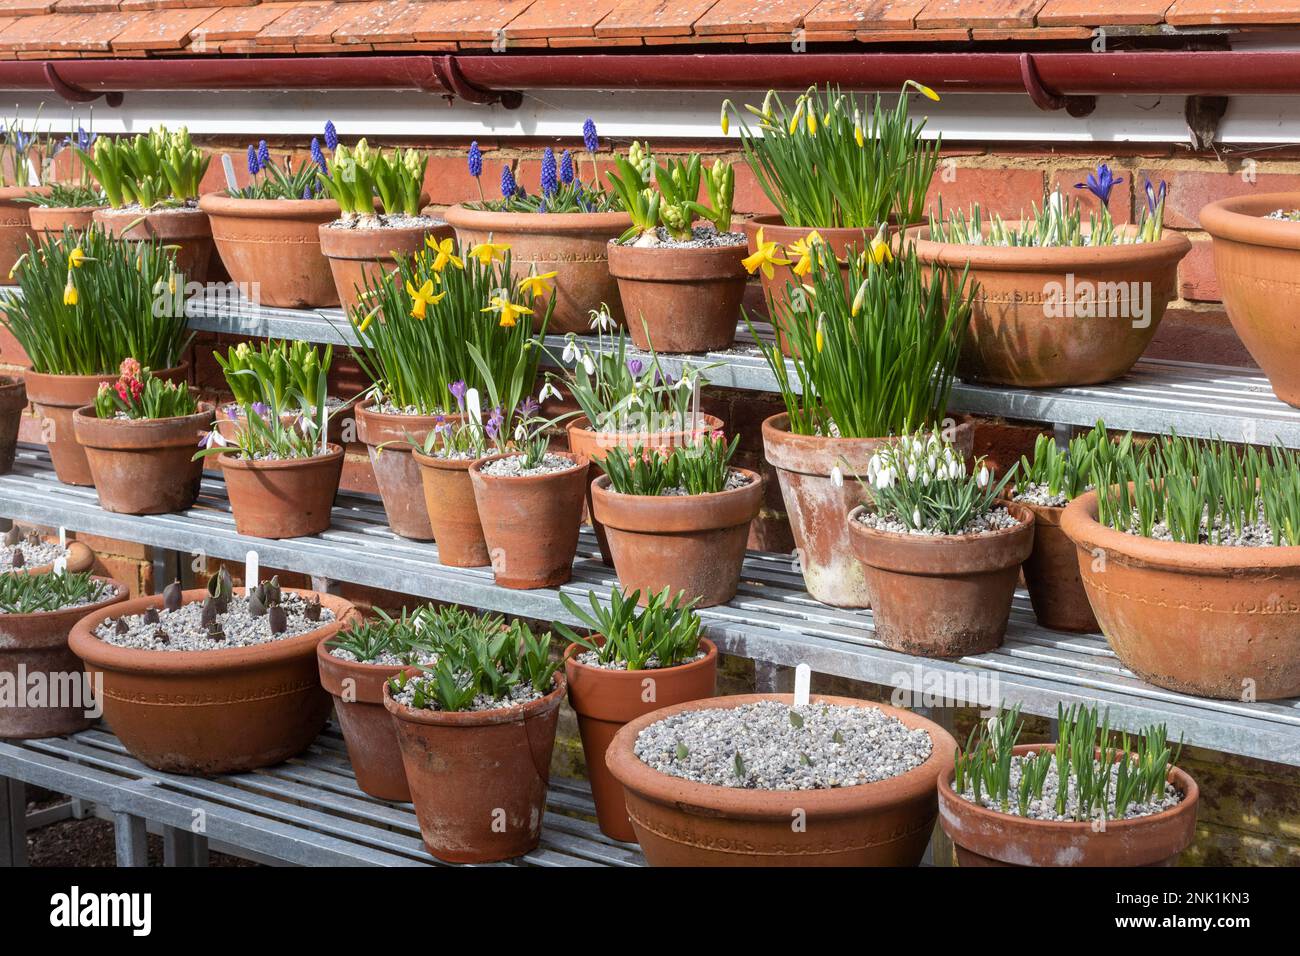 Display of early spring bulbs and flowers including flowering miniature daffodils in terracotta pots, England, UK Stock Photo